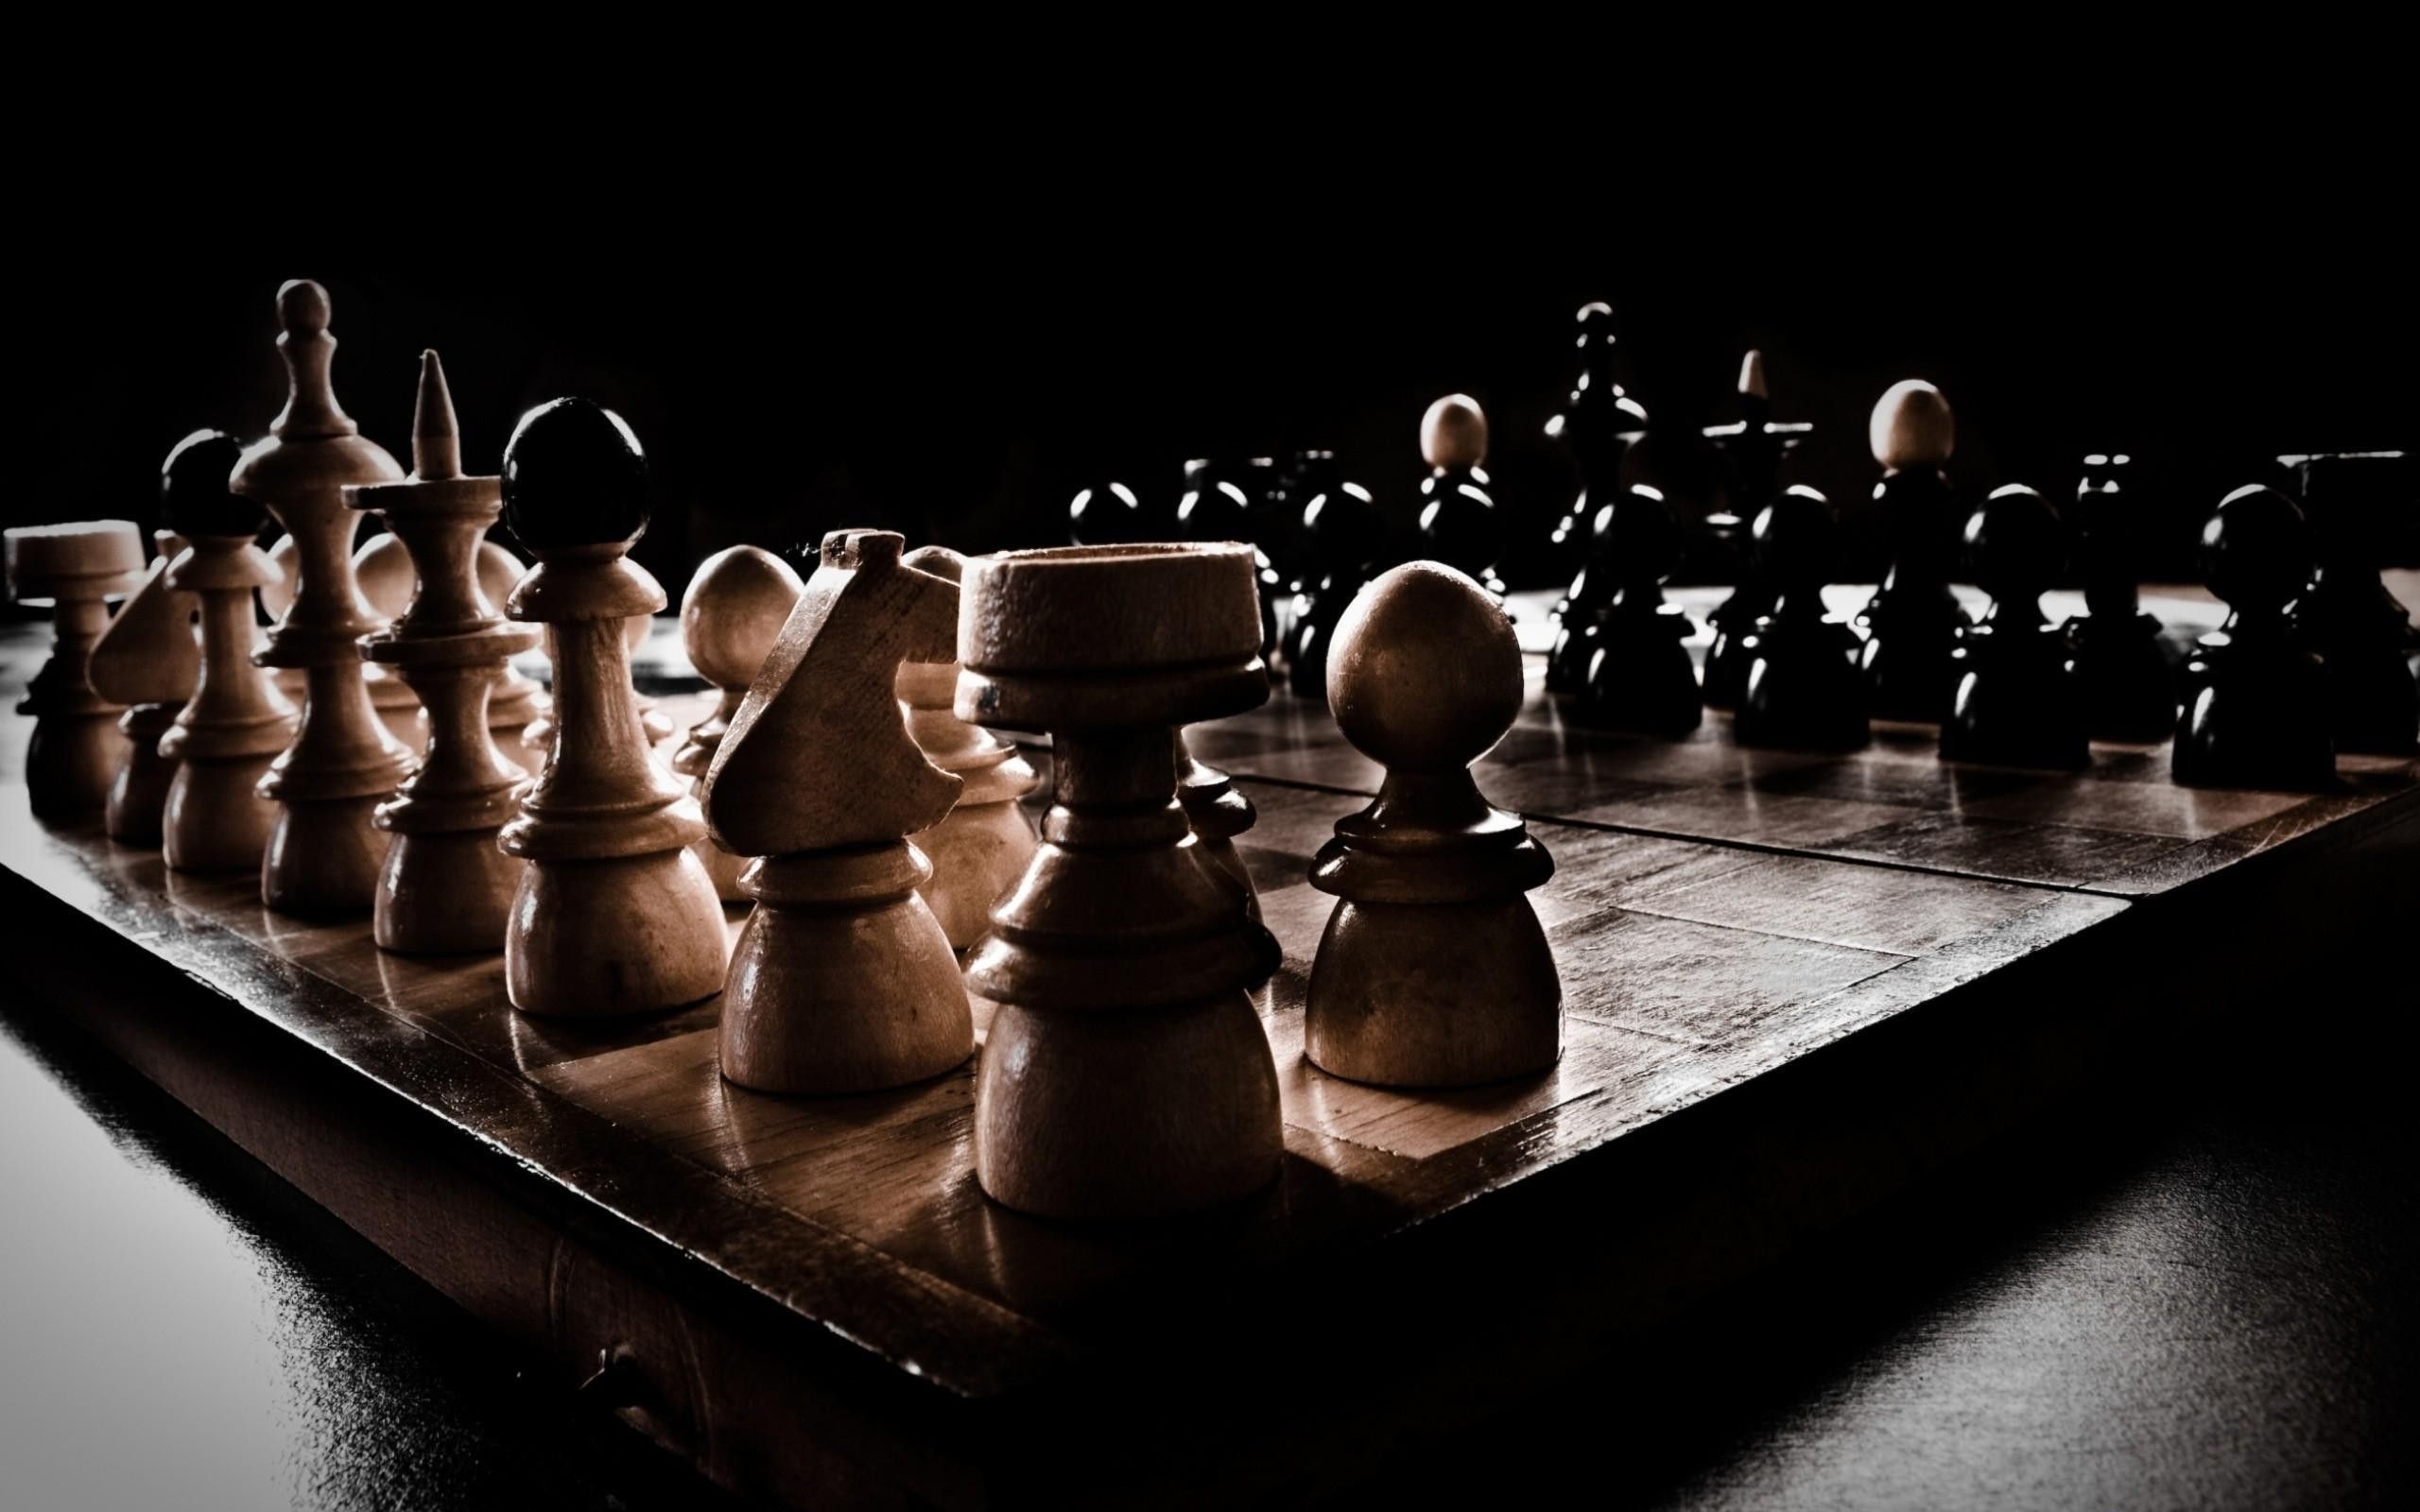 chess, board games, chess pieces, chess board wallpaper